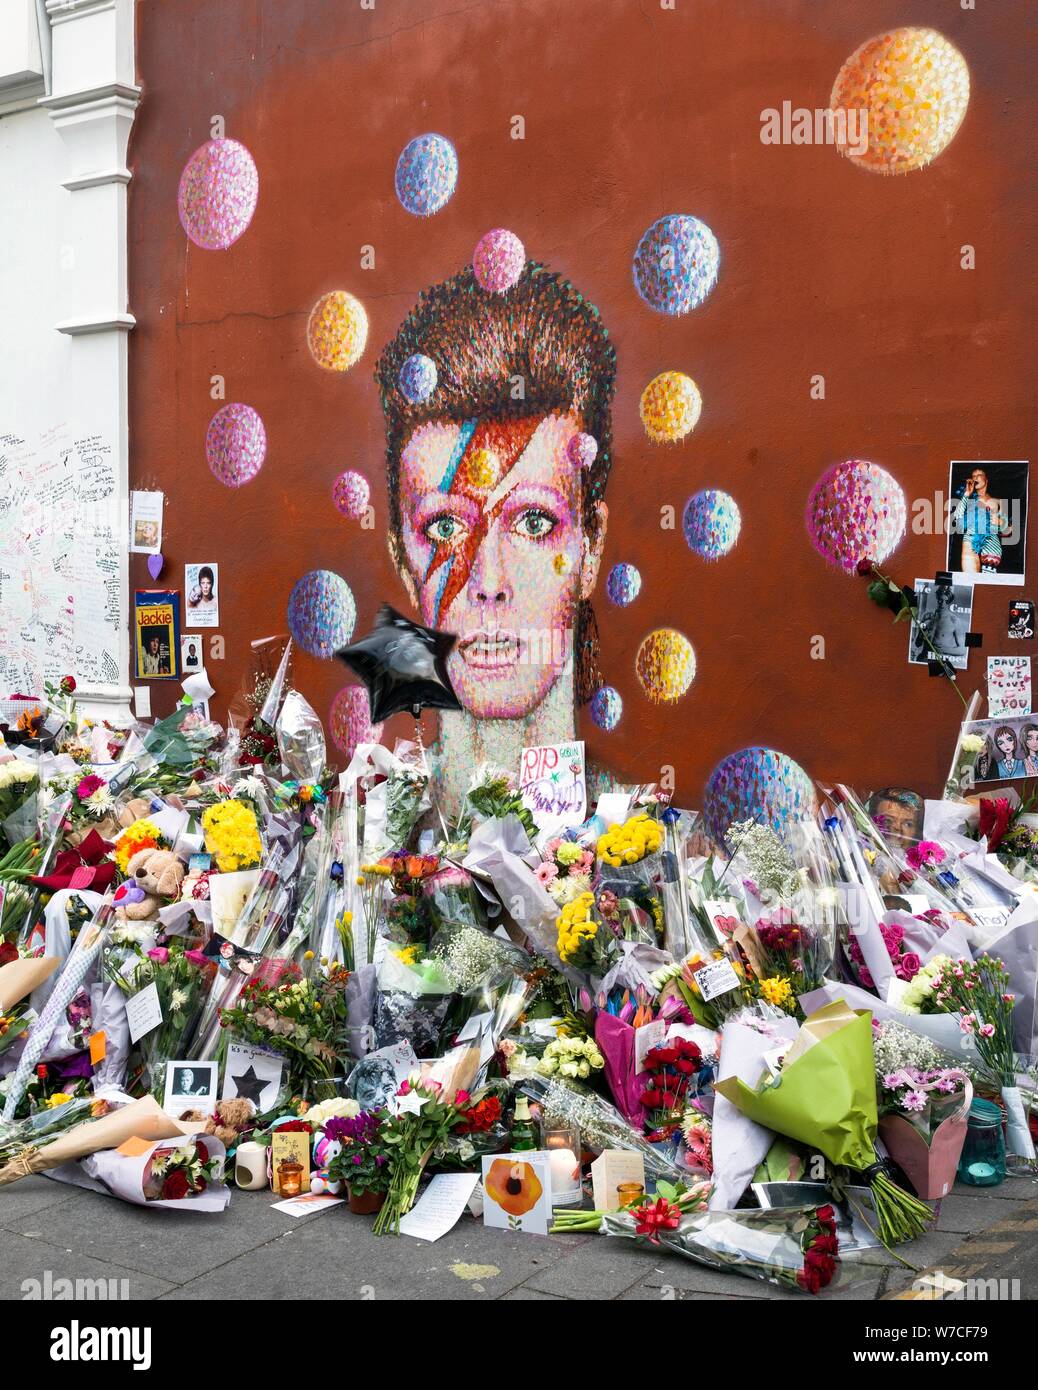 Tribute to David Bowie, Tunstall Road, Brixton, London, January 2016. Artist: Chris Redgrave. Stock Photo